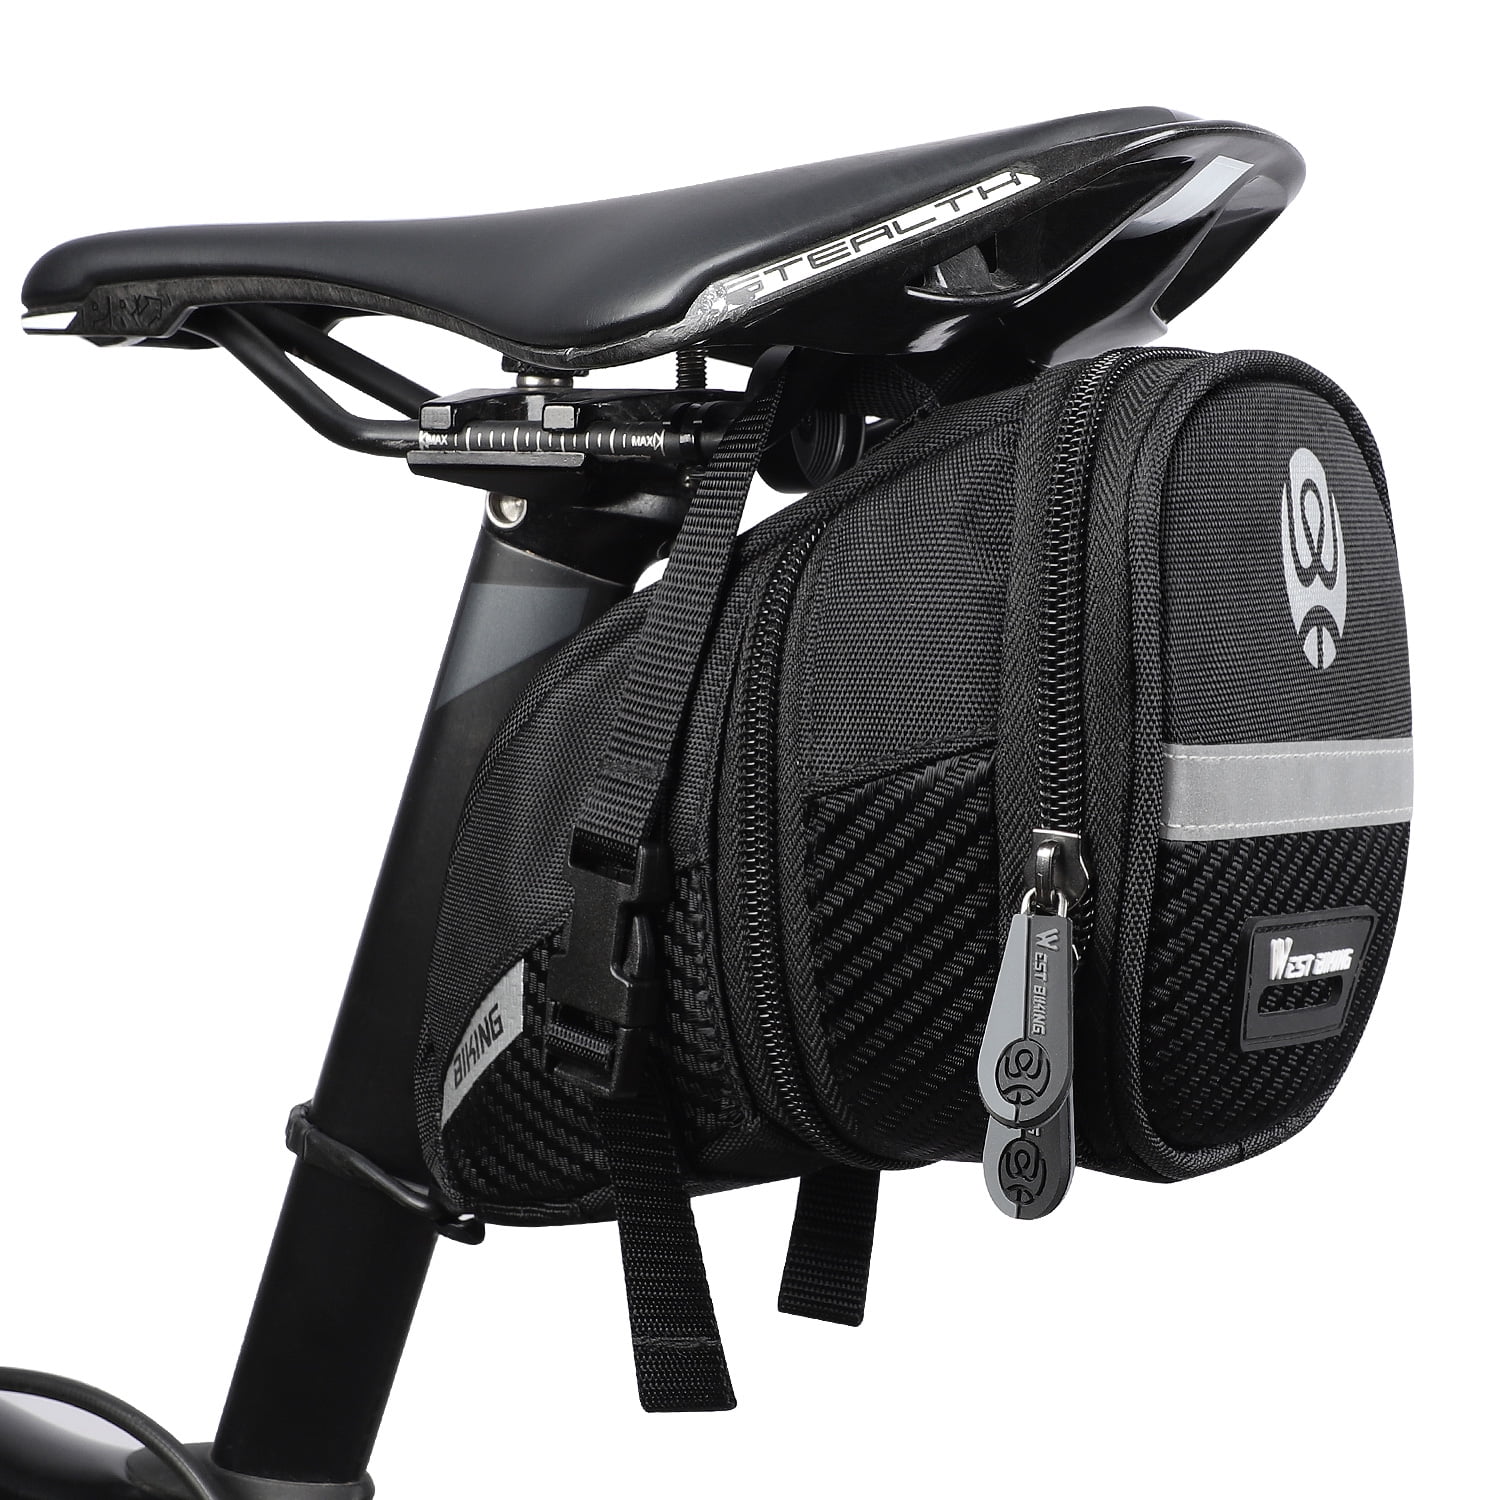 Details about   Lightweight Waterproof Mountain Bike Tool Bag Anti-Abrasive Bicycle Bag For Home 